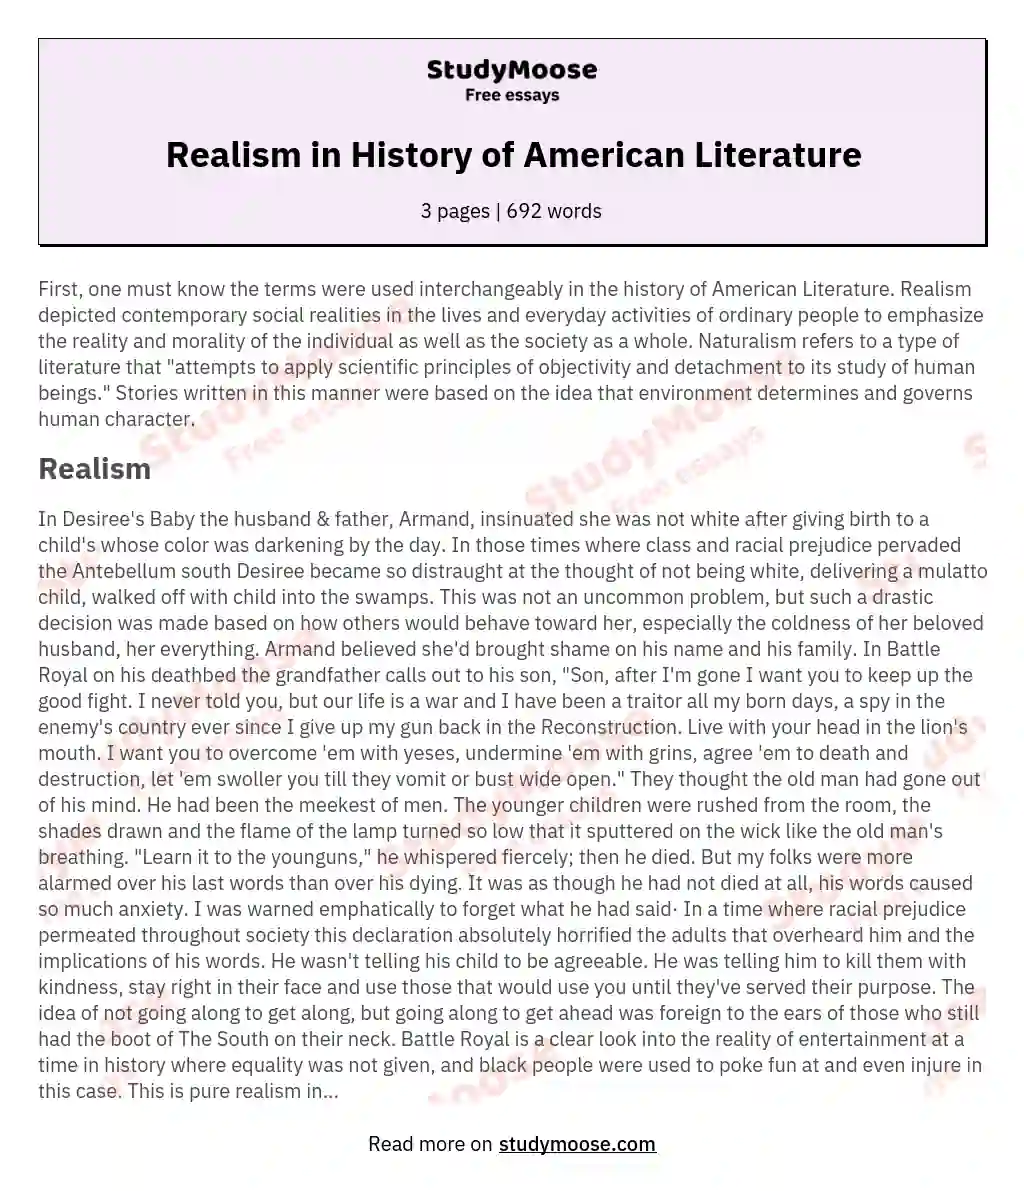 Realism in History of American Literature essay